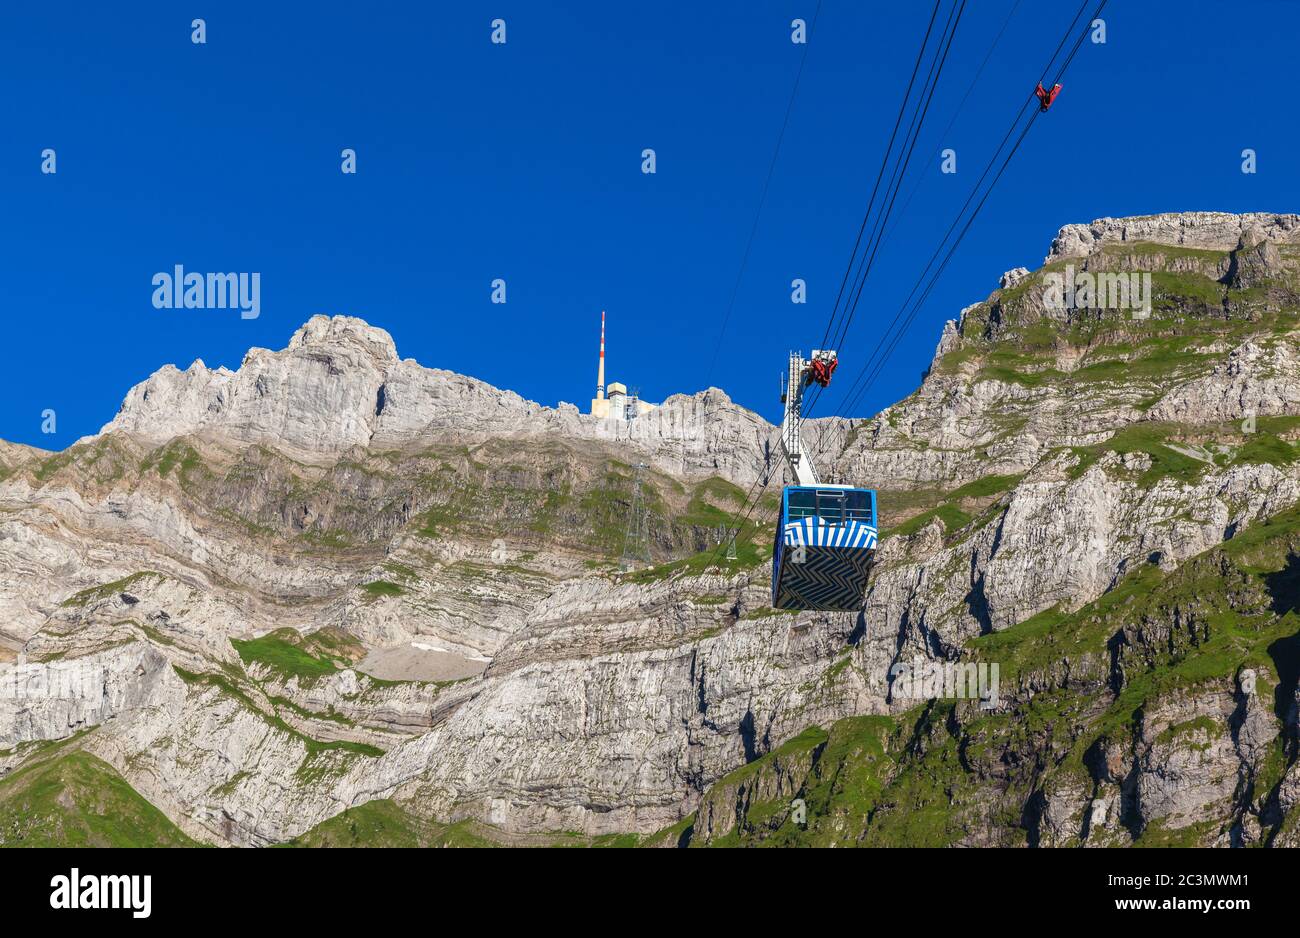 Cablecar running towards Santis (Santis) a famous peak of the Swiss Alps,  Canton of Appenzell, Switzerland Stock Photo